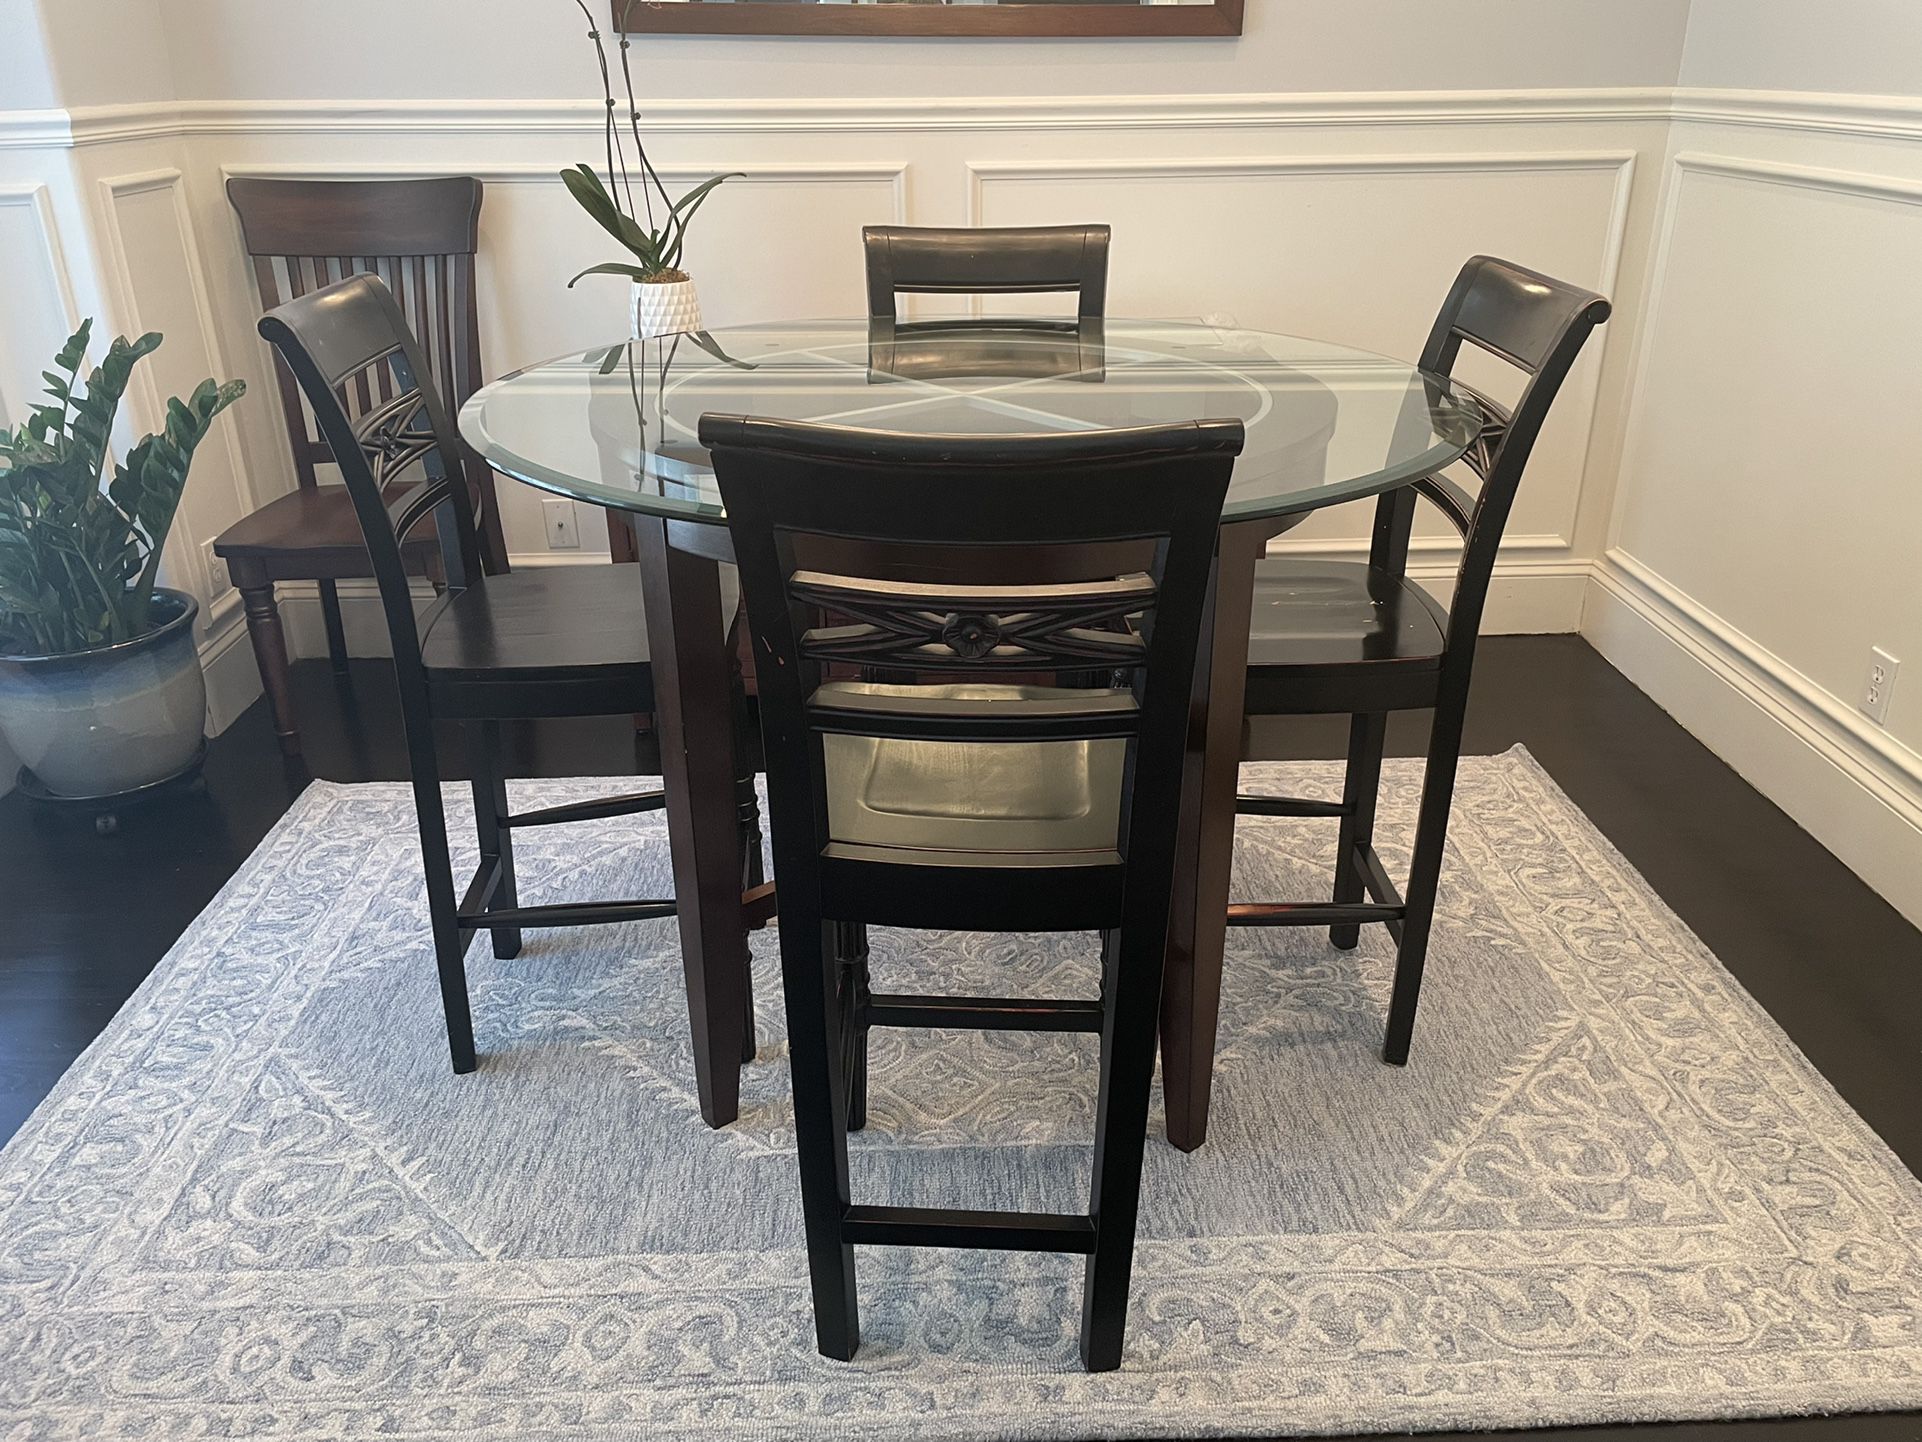 4 Person Glass Round Table With Chairs 